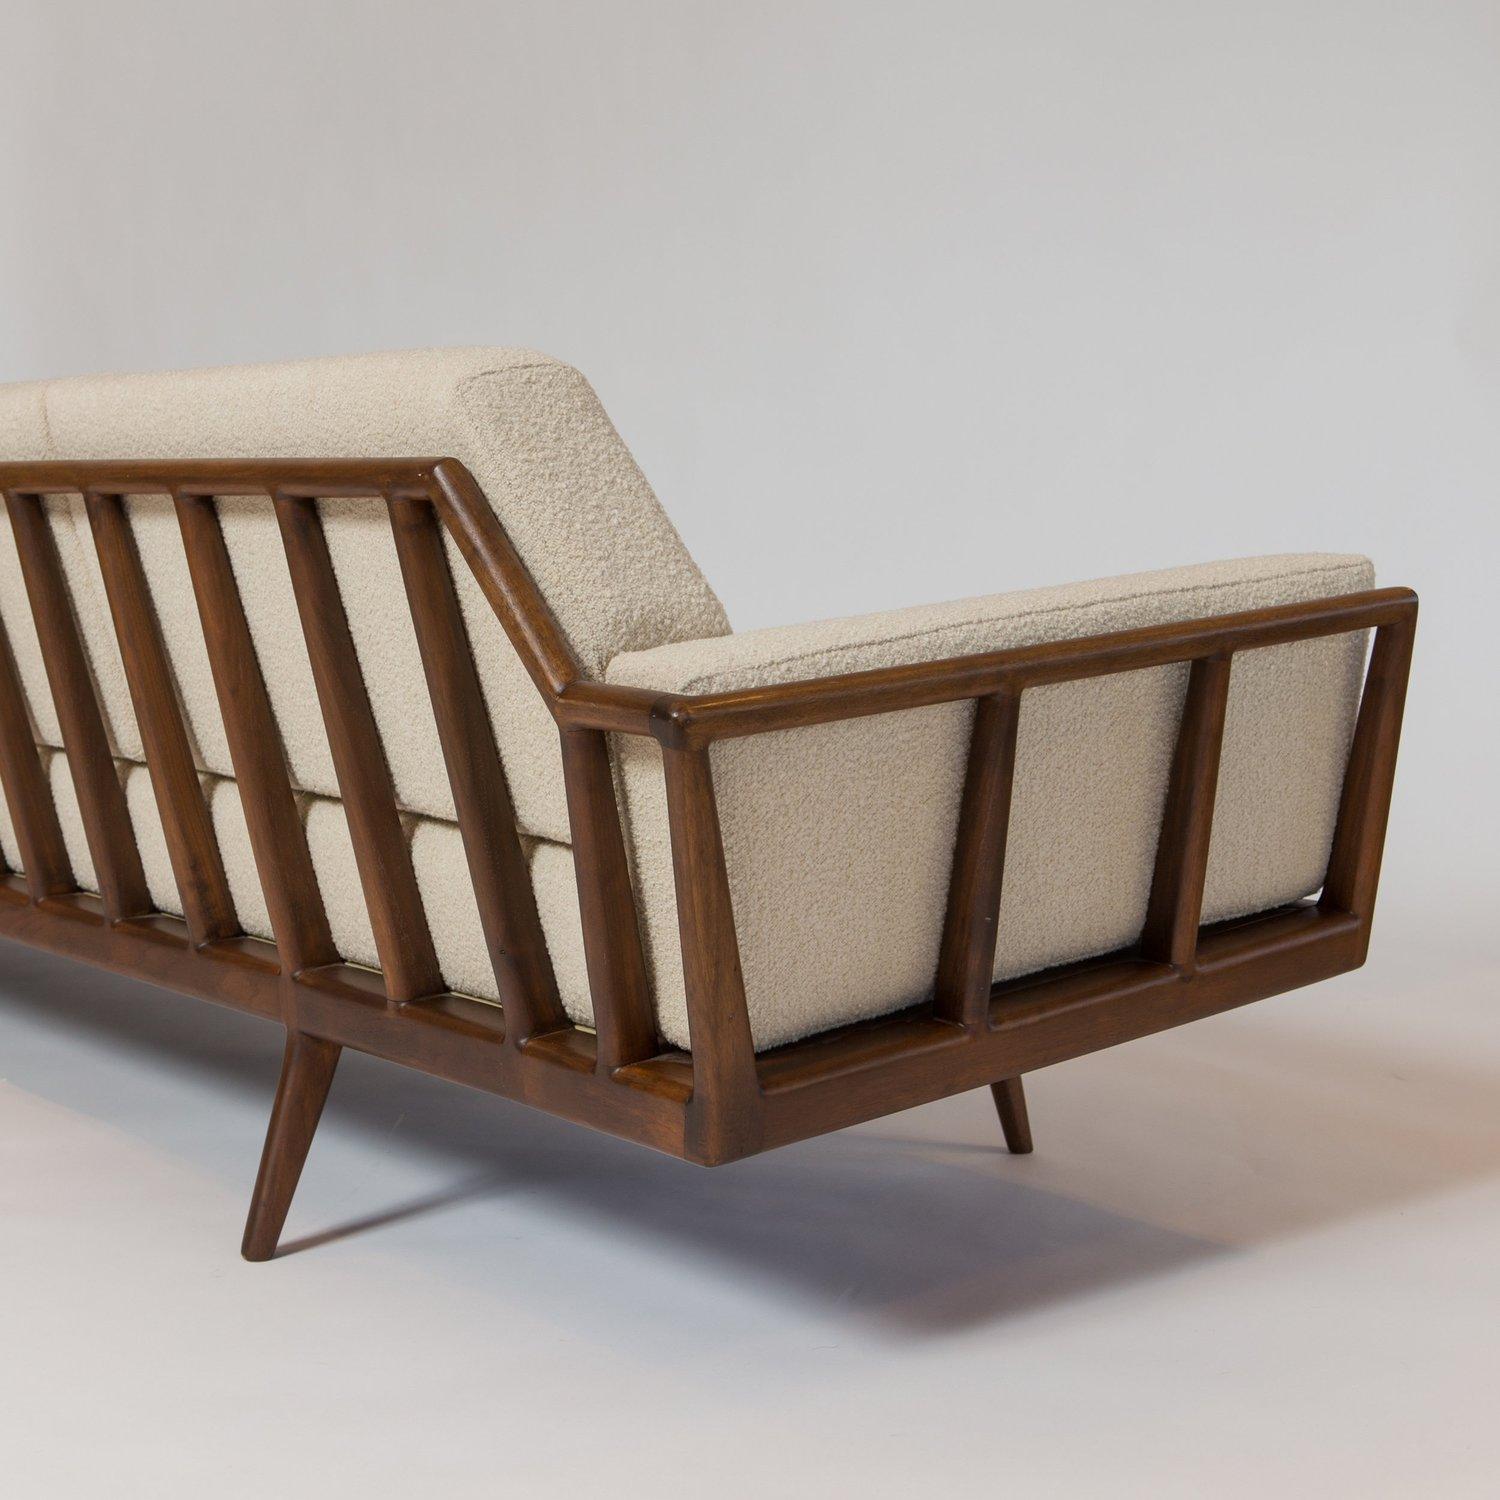 Originally designed by Mel Smilow in 1956 and officially reintroduced by his daughter Judy Smilow in 2013, the Rail Back Sofa is classically midcentury. This collection’s sculpted wooden frames gracefully envelop you, providing for a comfortable and